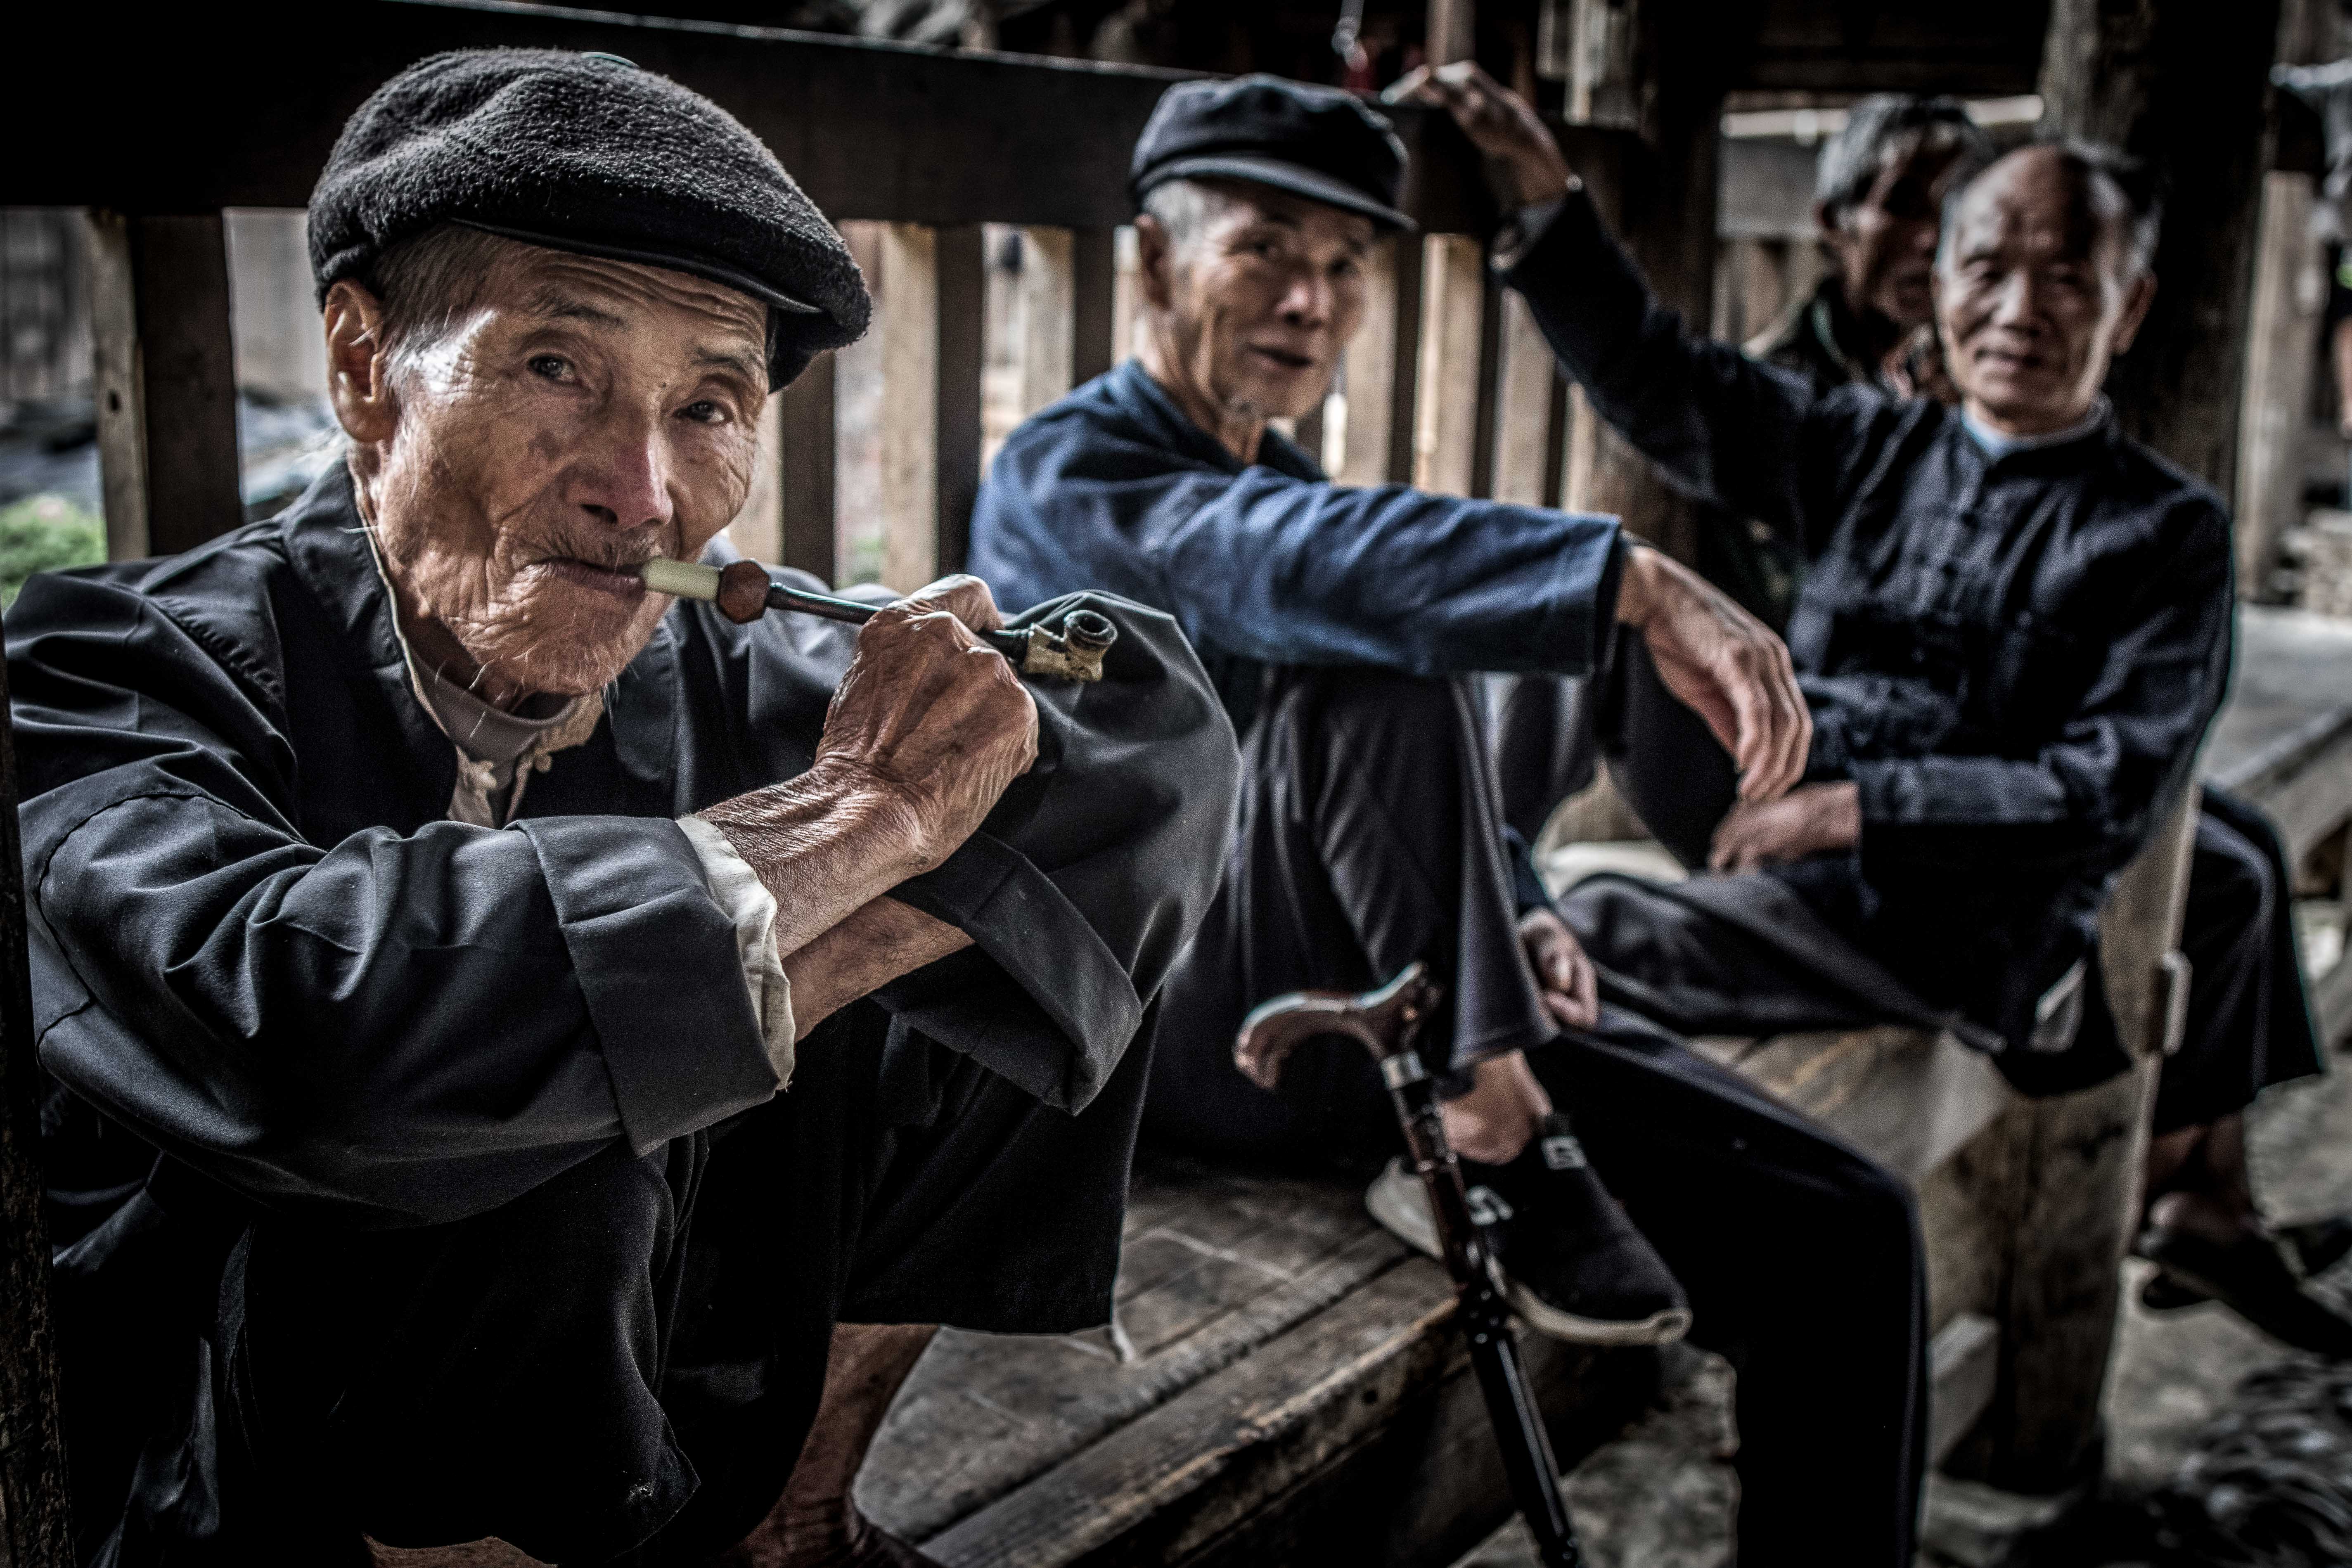 In Guizhou villages, old men mostly spend their time chatting and smoking pipe. Here there are some from the Dong ethnic group under the roof of a "wind and rain bridge".